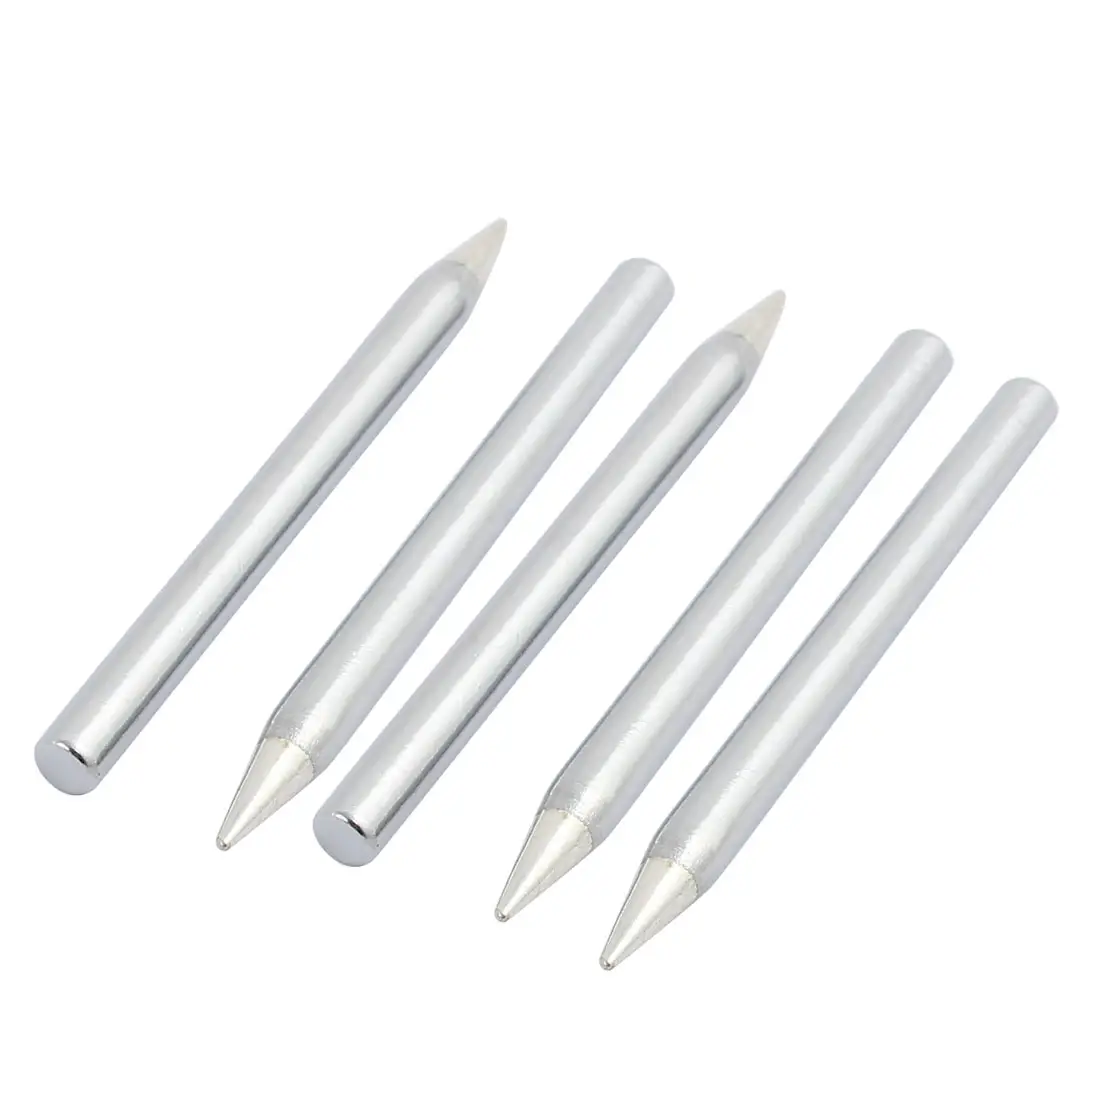 70mm Length Soldering Station Solder Iron Tool Pointed Tip Silver Tone 5Pcs